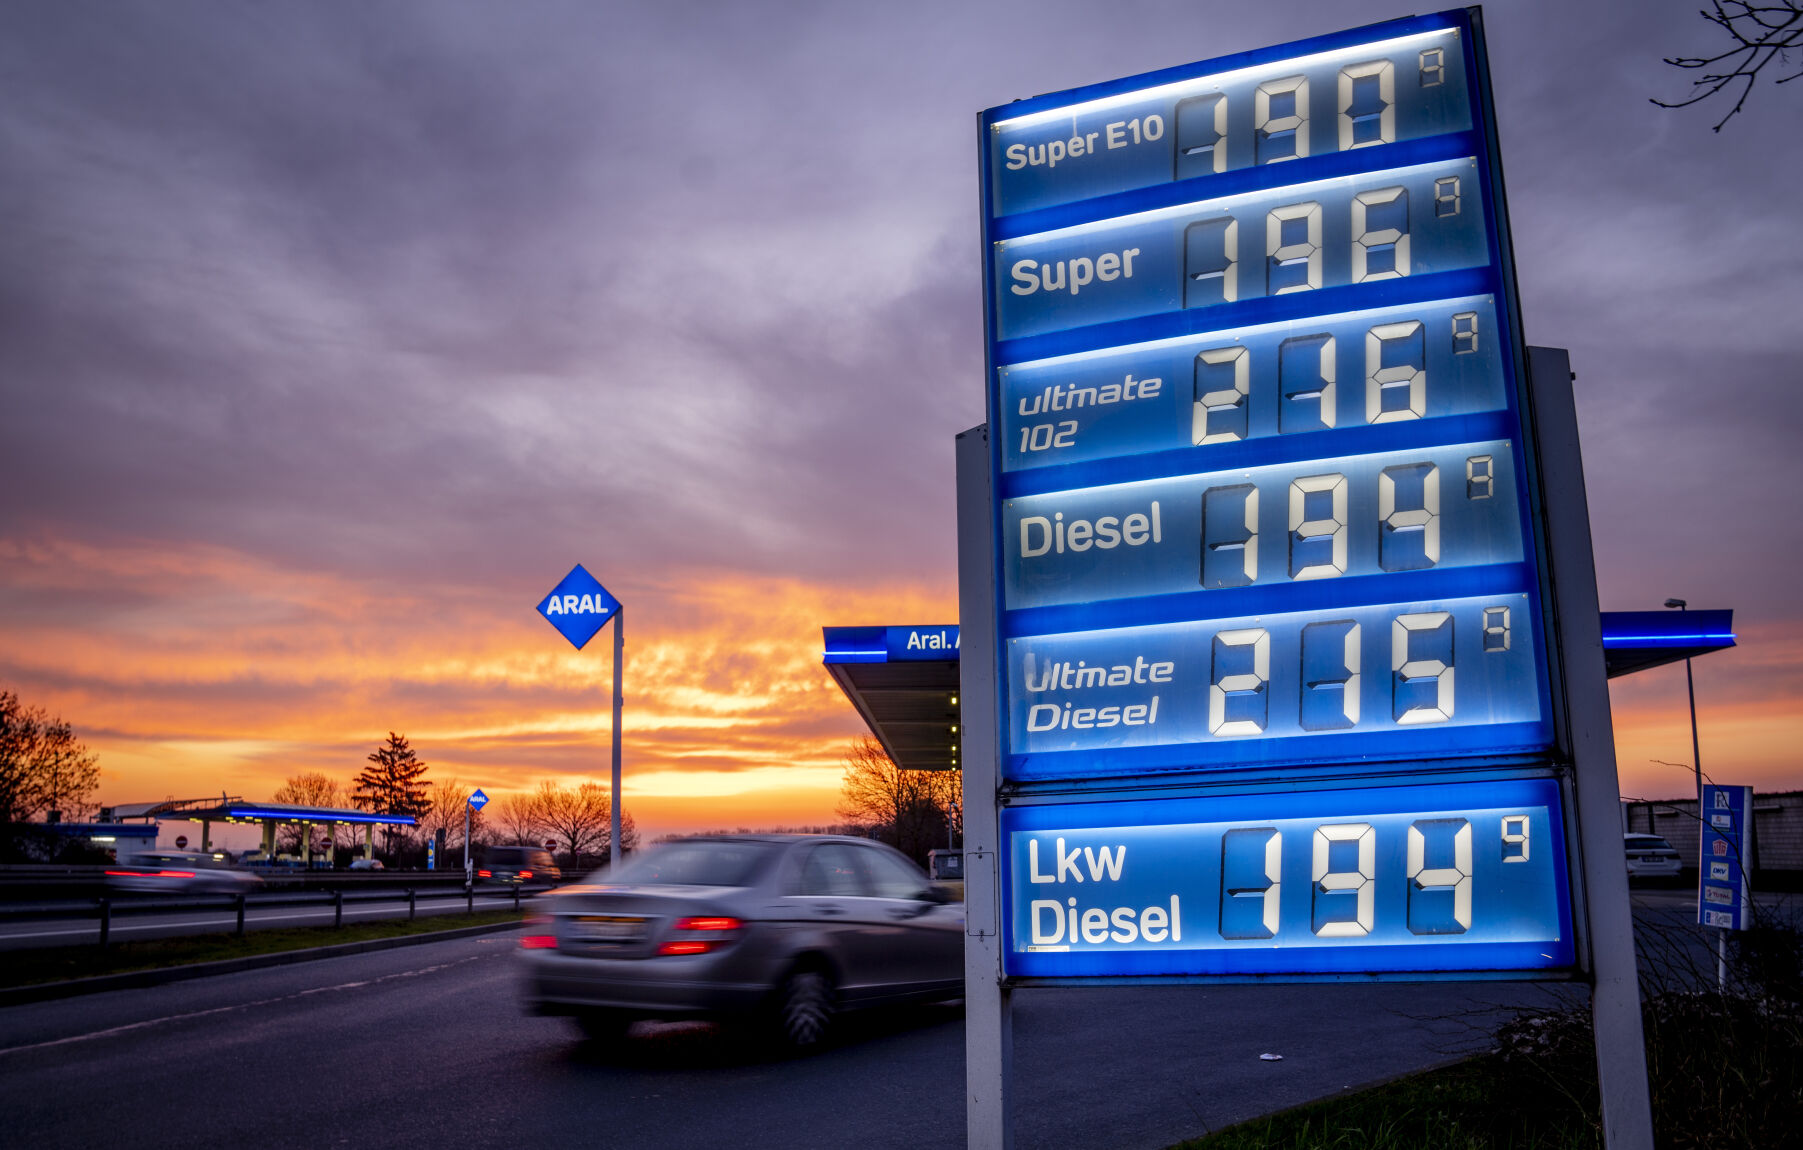 <p>A gas station is pictured on a highway near Frankfurt, Germany, before sunrise on Wednesday, March 1, 2023. (AP Photo/Michael Probst)</p>   PHOTO CREDIT: Michael Probst